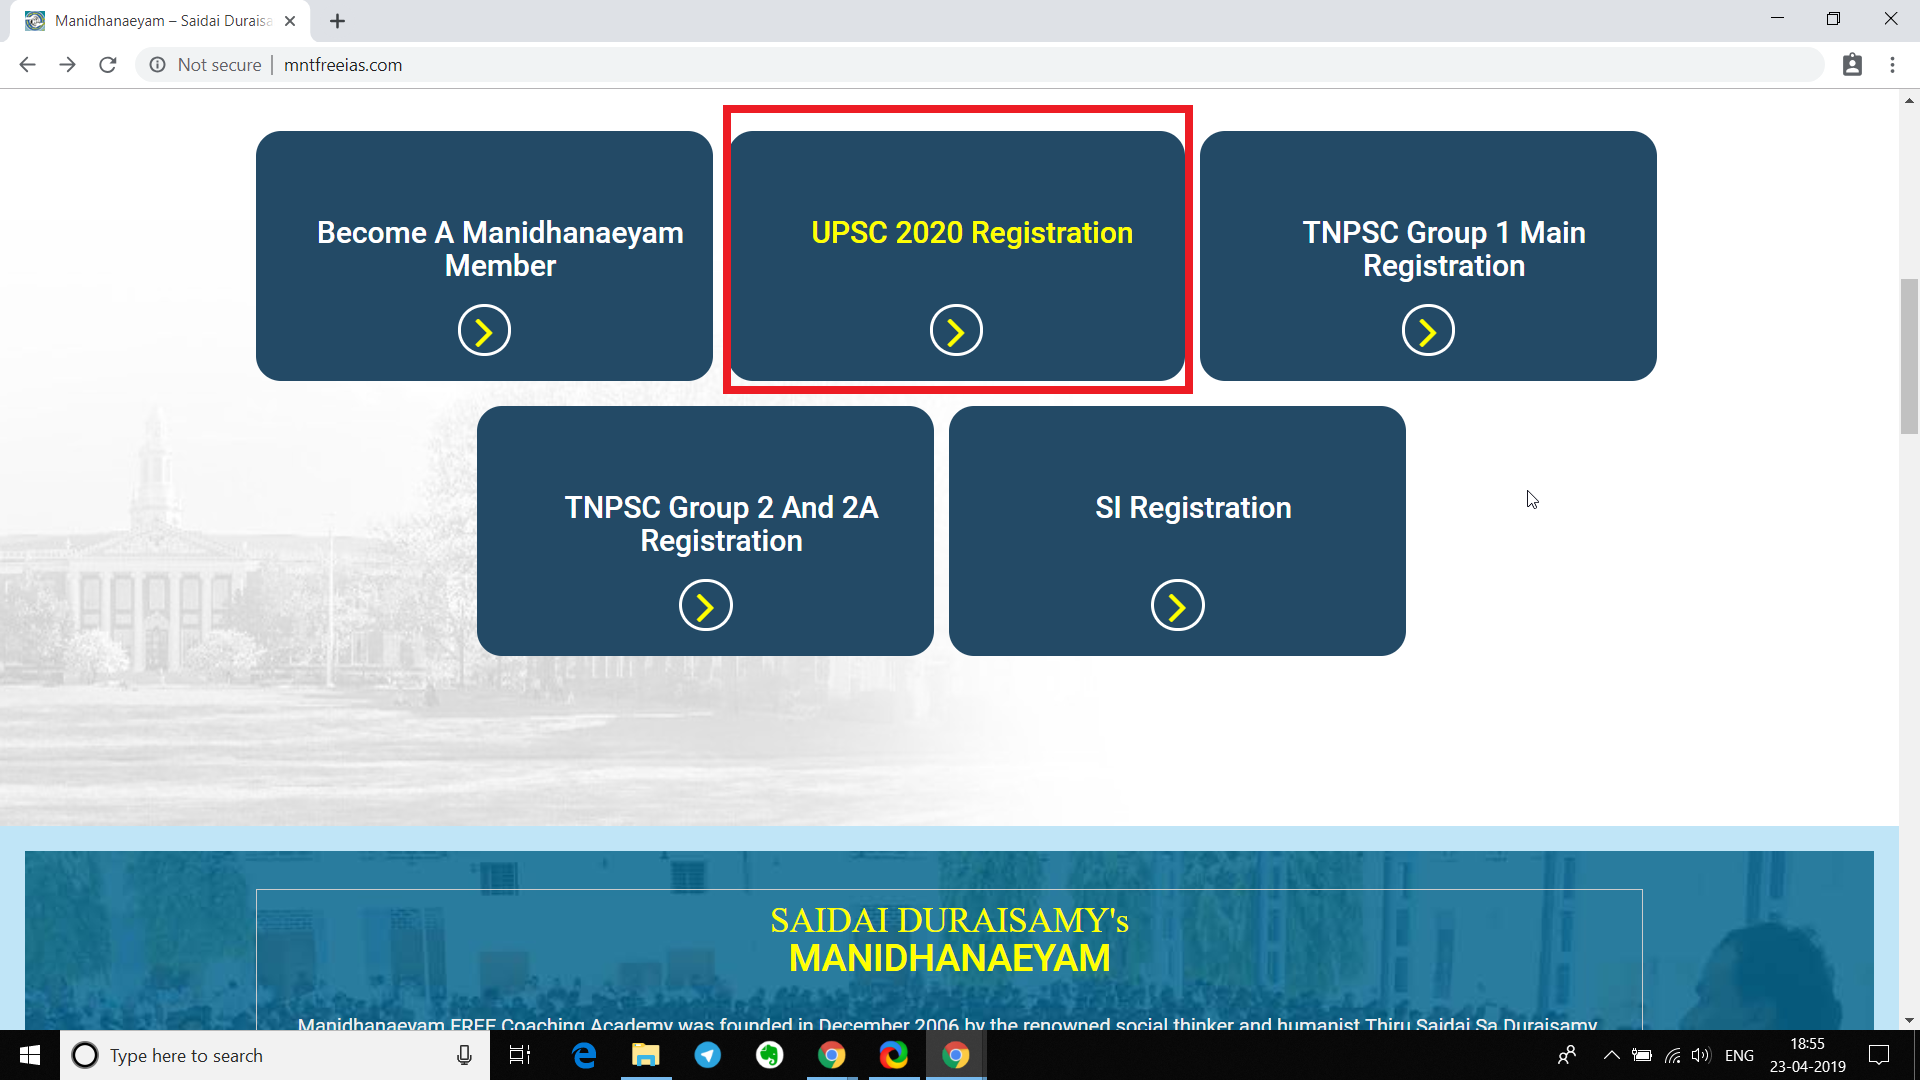 How to apply for Manidhaneyam 2019 Step 1